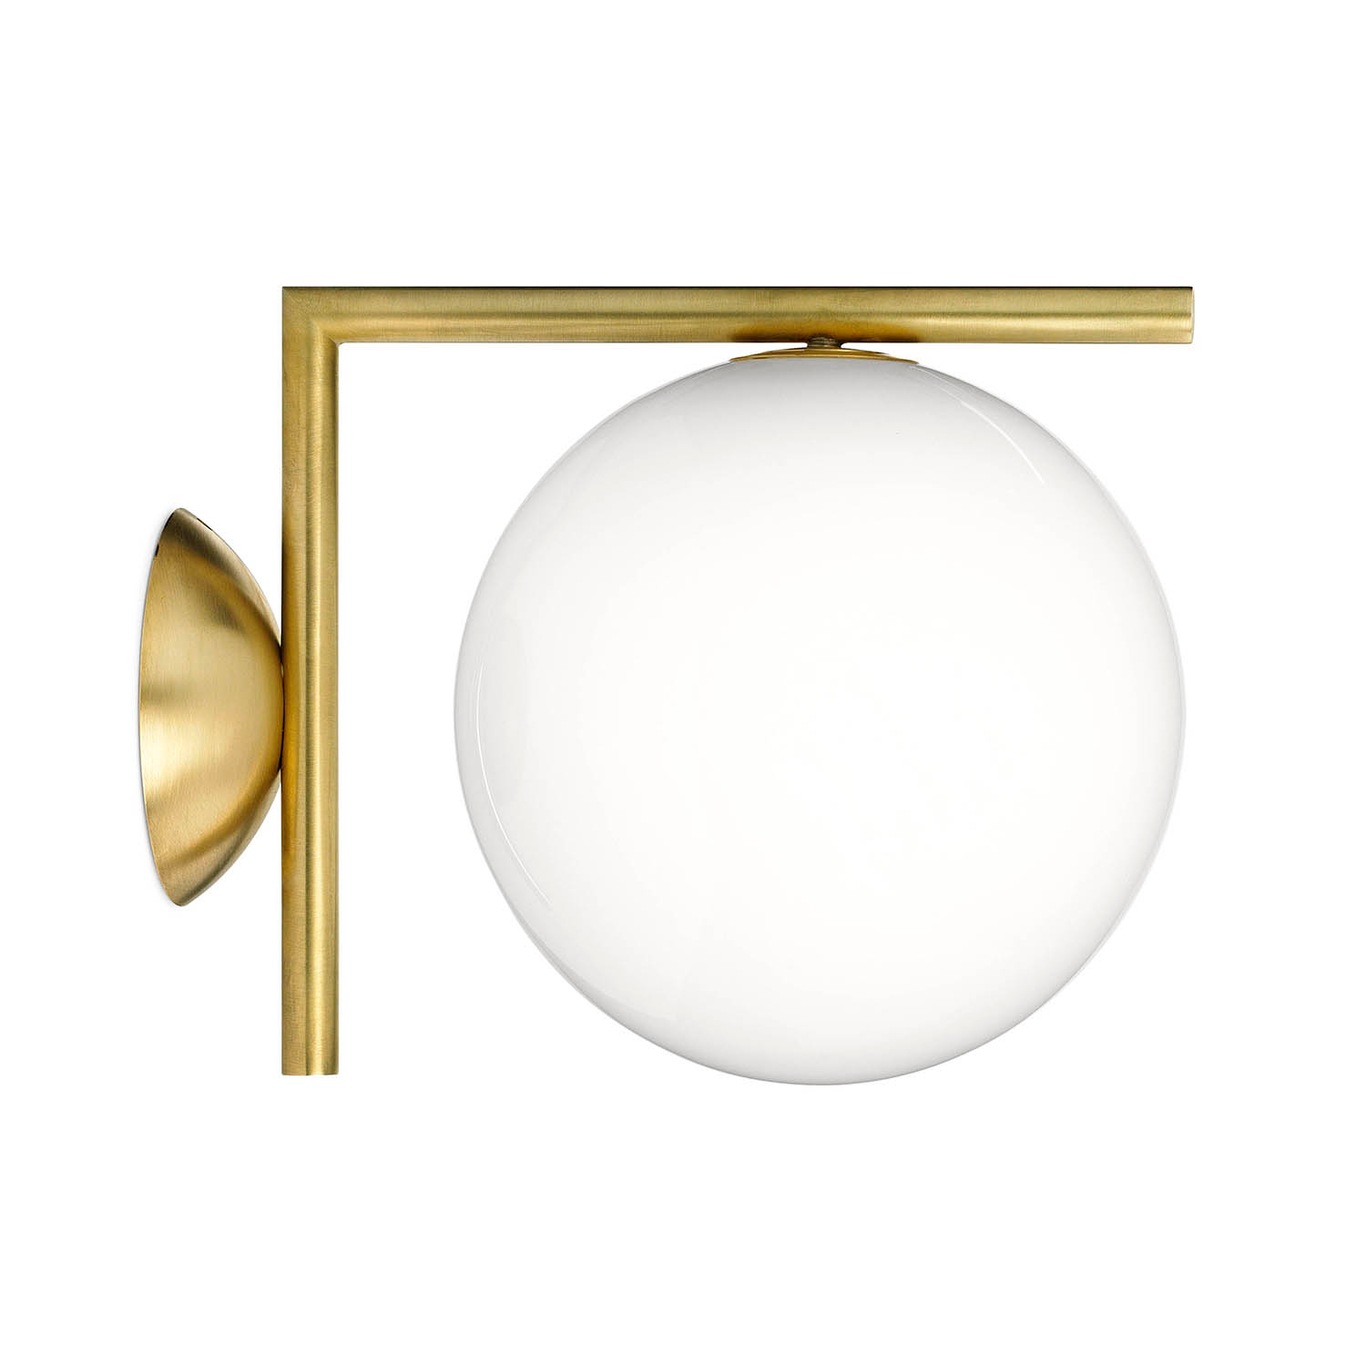 IC Lights C/W1 Wall/Ceiling Lamp, Brushed Brass